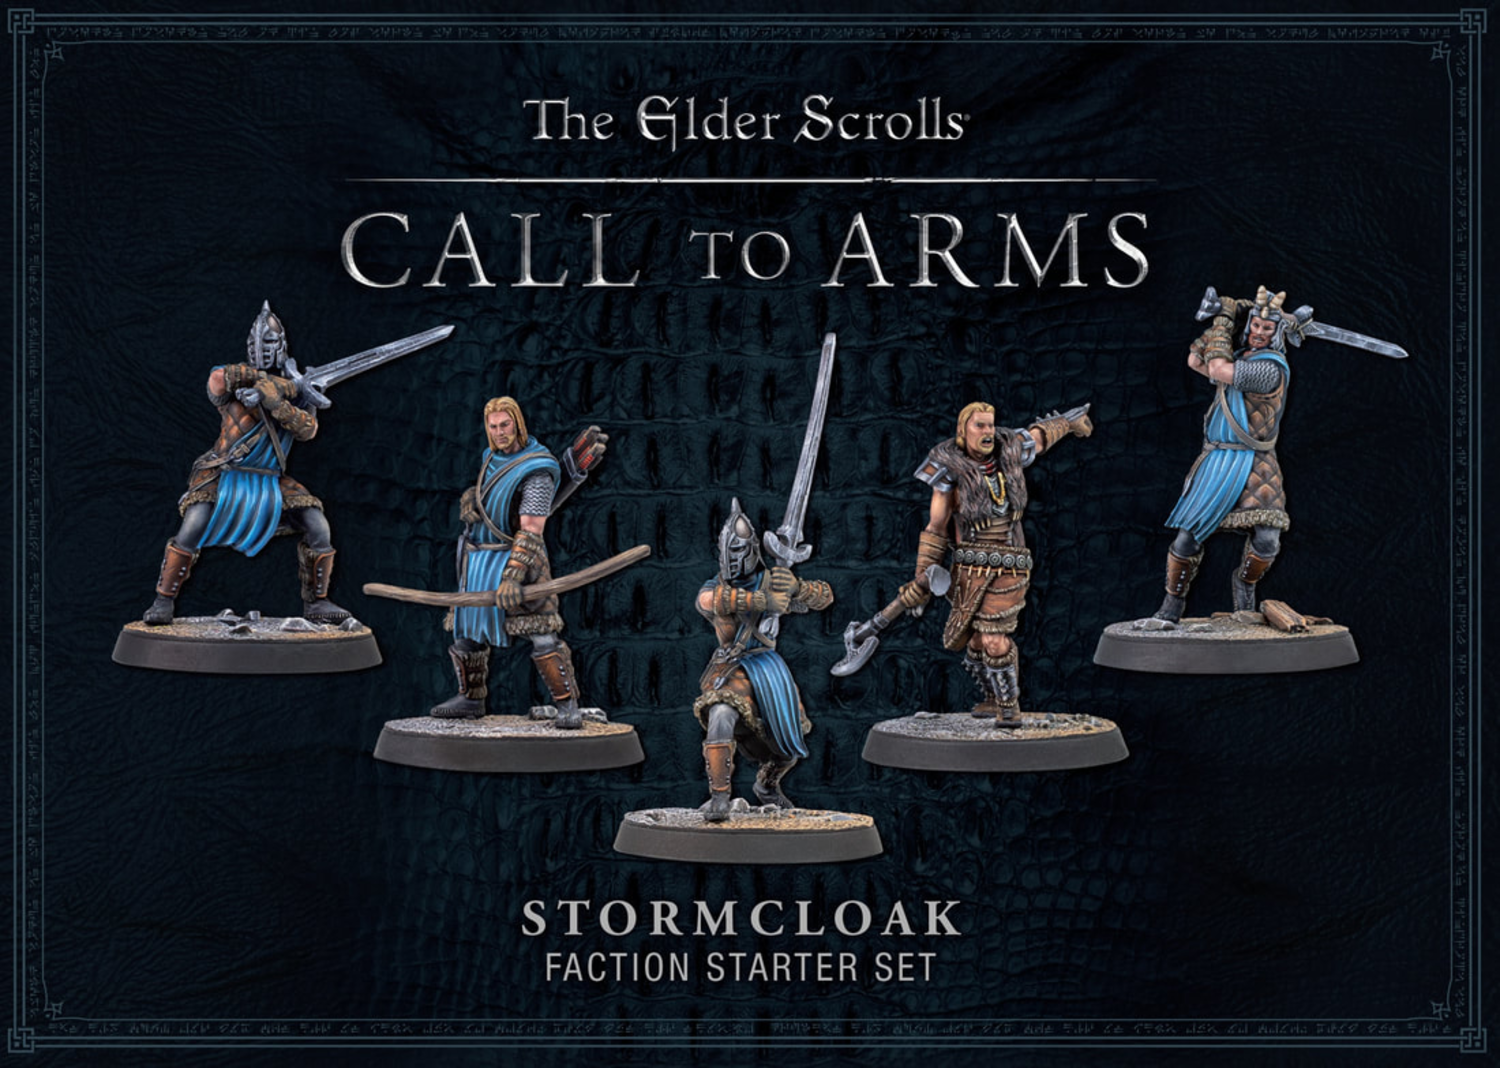 THE ELDER SCROLLS: CALL TO ARMS